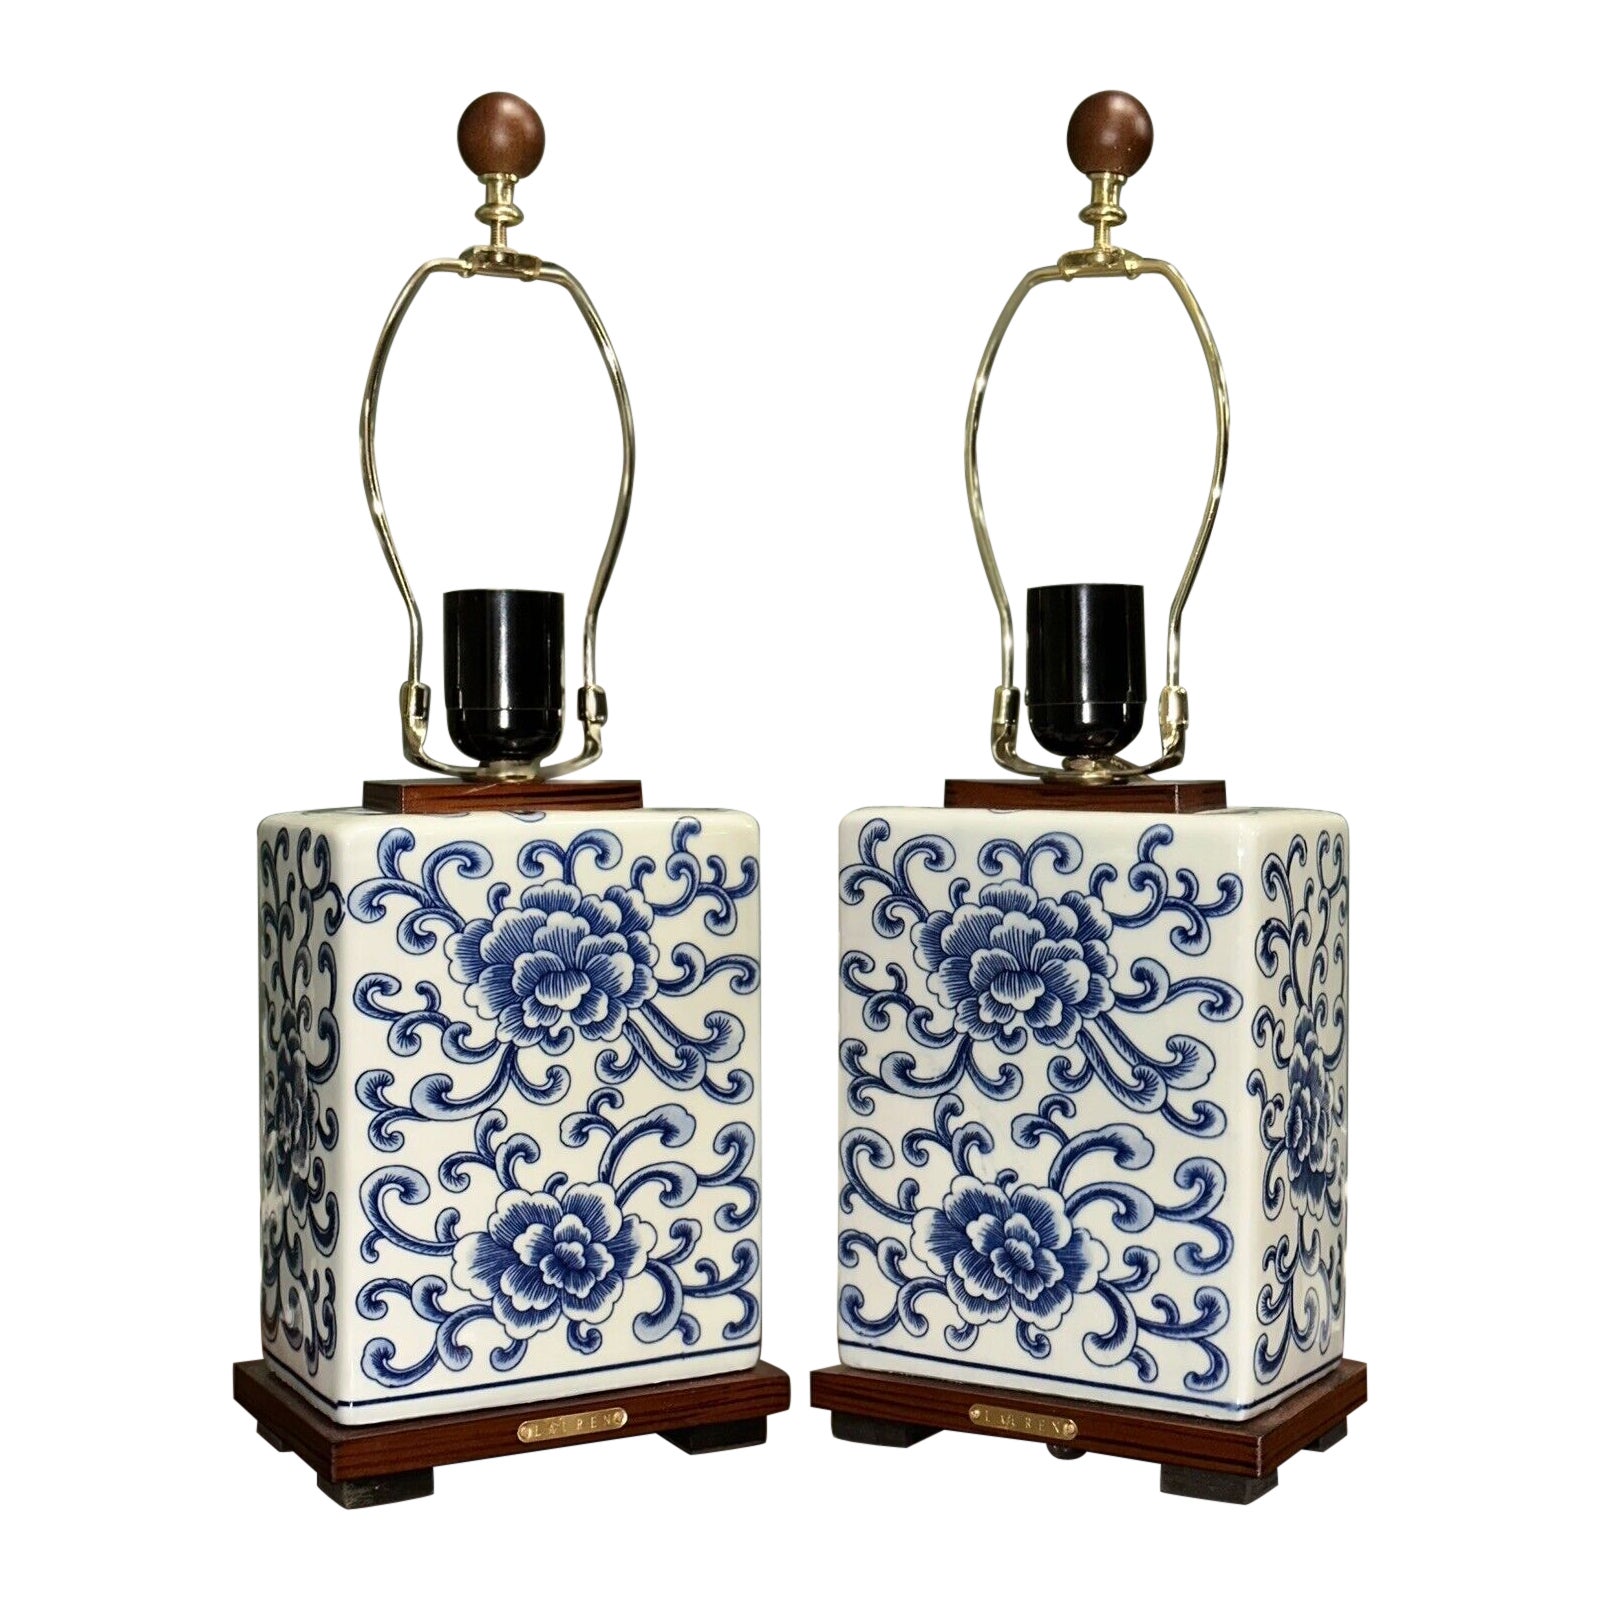 PAIR OF RALPH LAUREN BLUE & WEISSE PORCELAIN TABLE LAMPS STUNNING CHiNESE DESIGN 